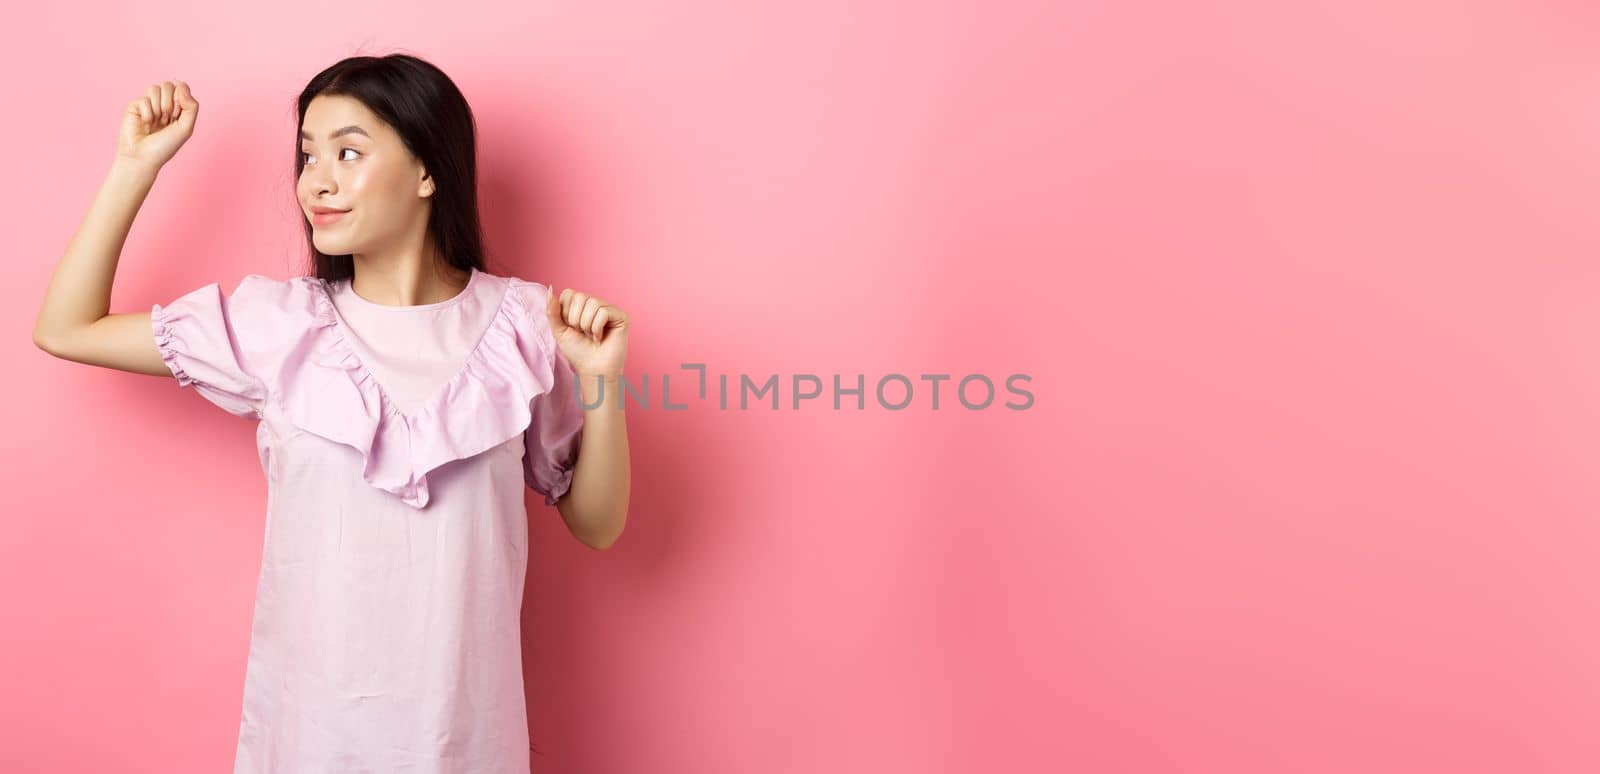 Carefree asian girl dancing, raising hand up and looking left at logo, standing in romantic dress against pink background.